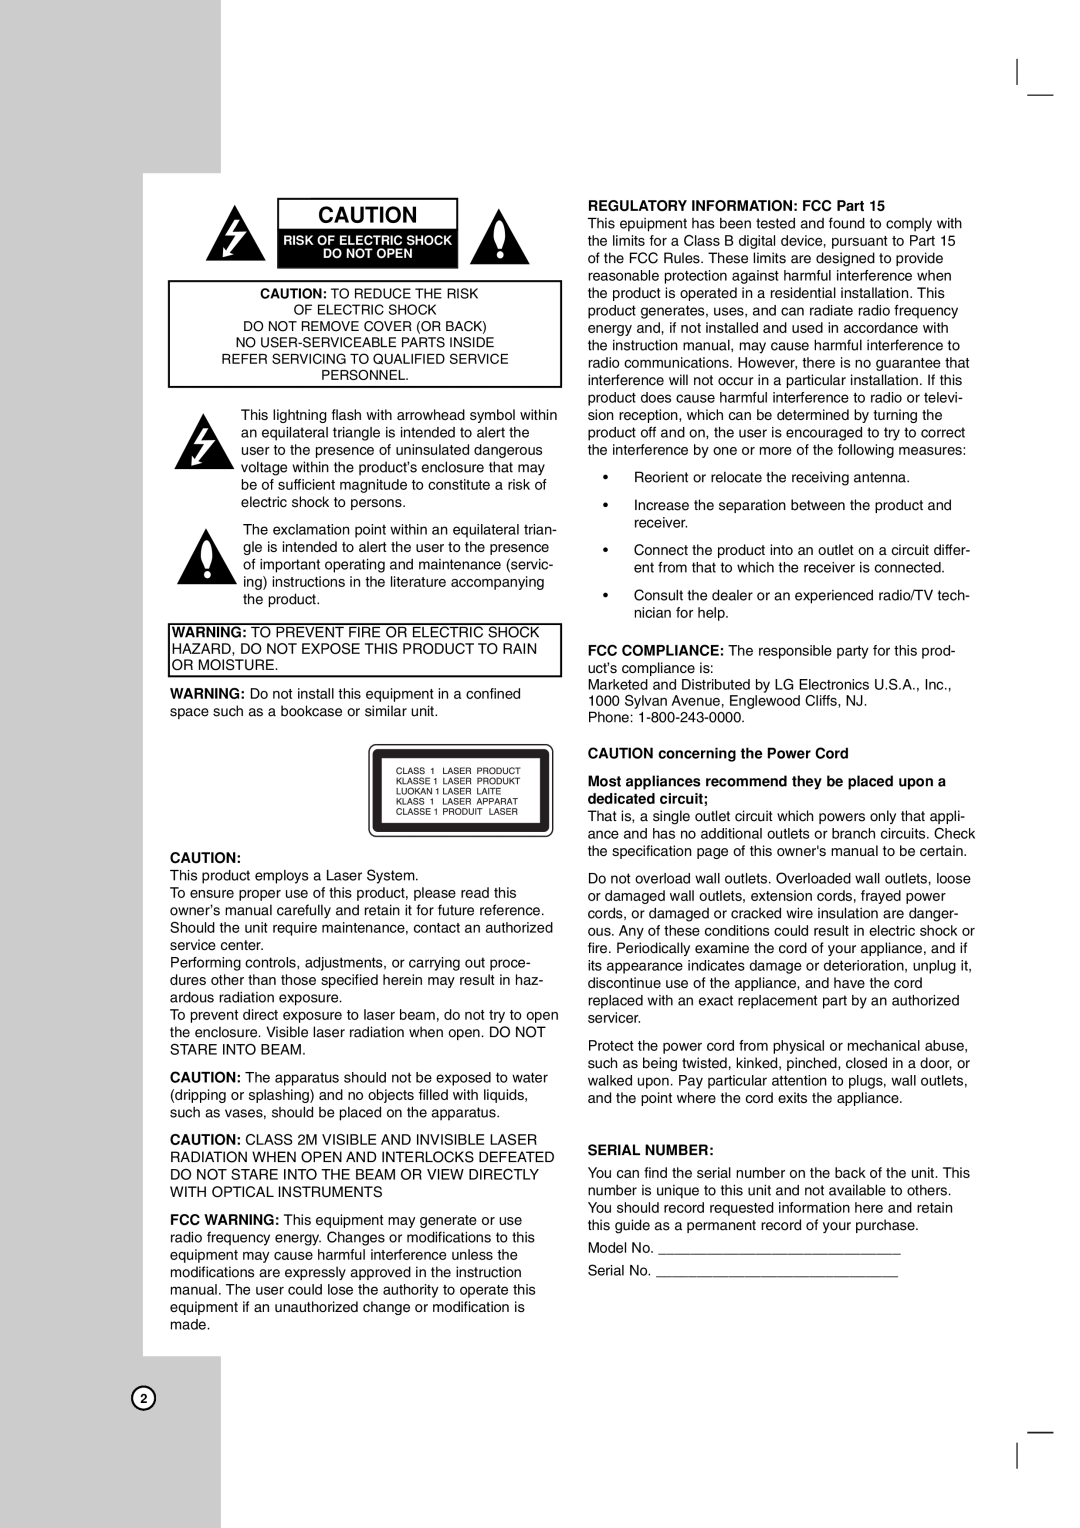 Zenith ZRY-316 warranty REGULATORY INFORMATION FCC Part, CAUTION concerning the Power Cord, Serial Number 